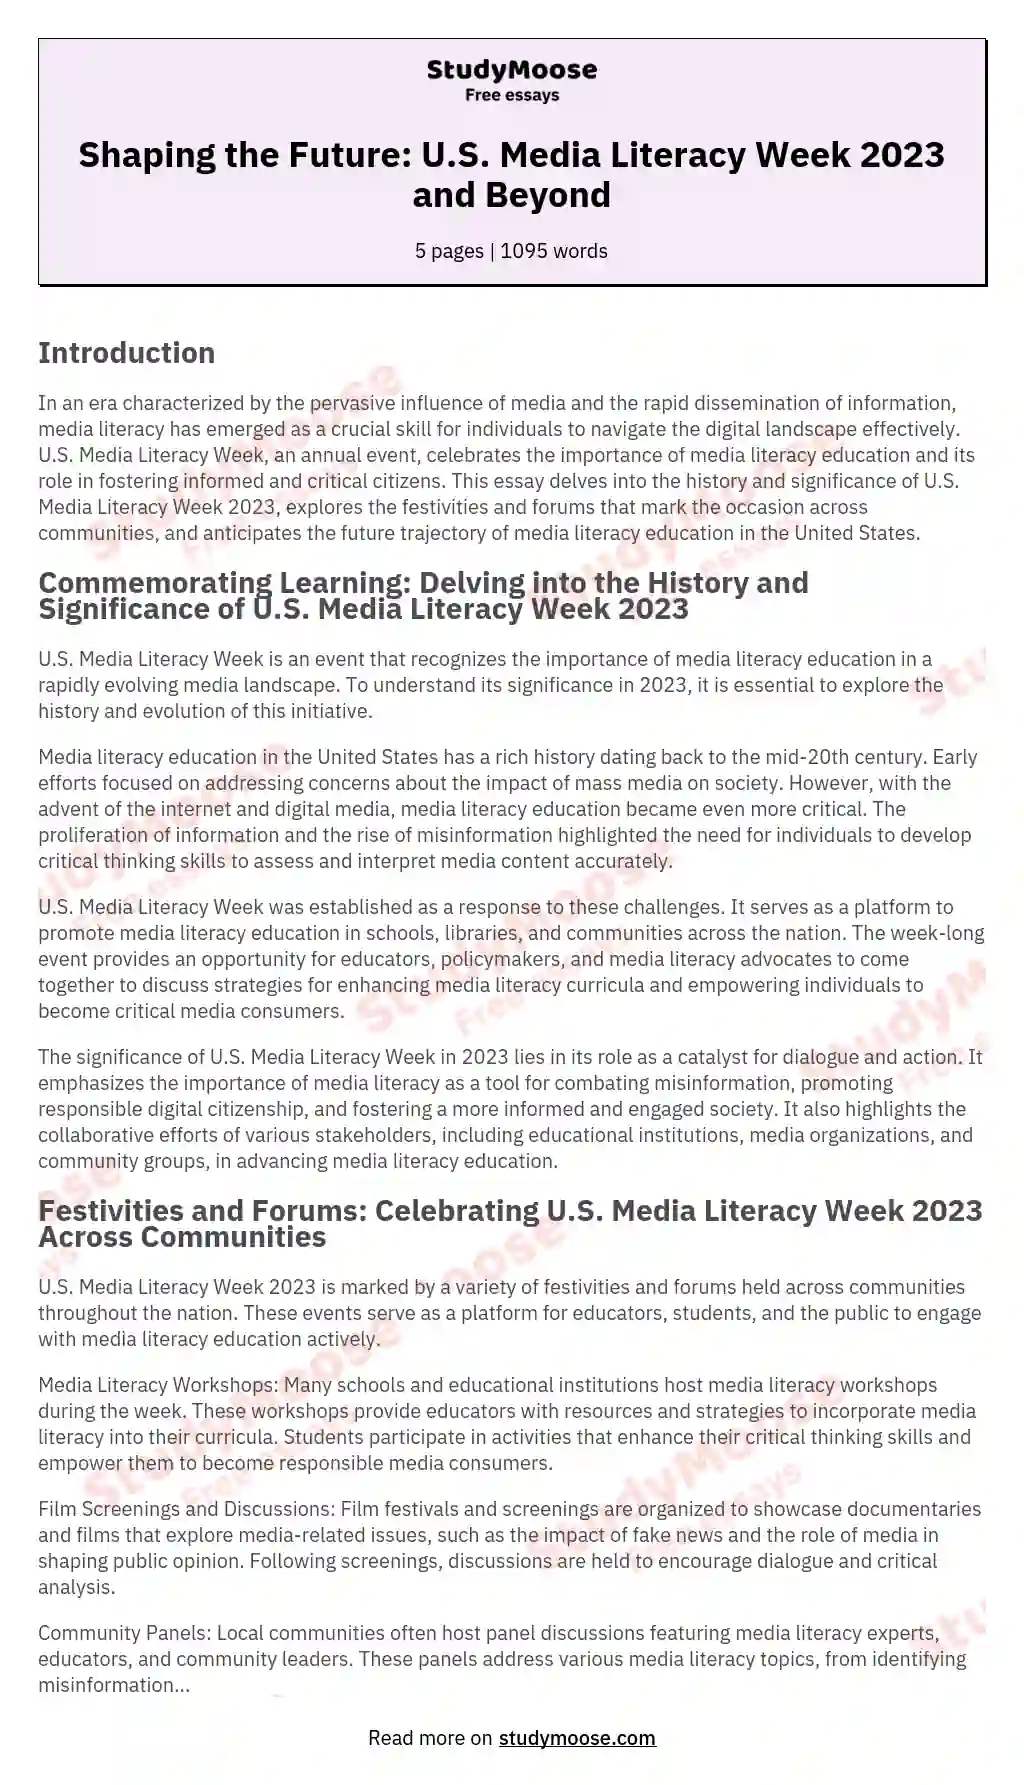 Shaping the Future: U.S. Media Literacy Week 2023 and Beyond essay